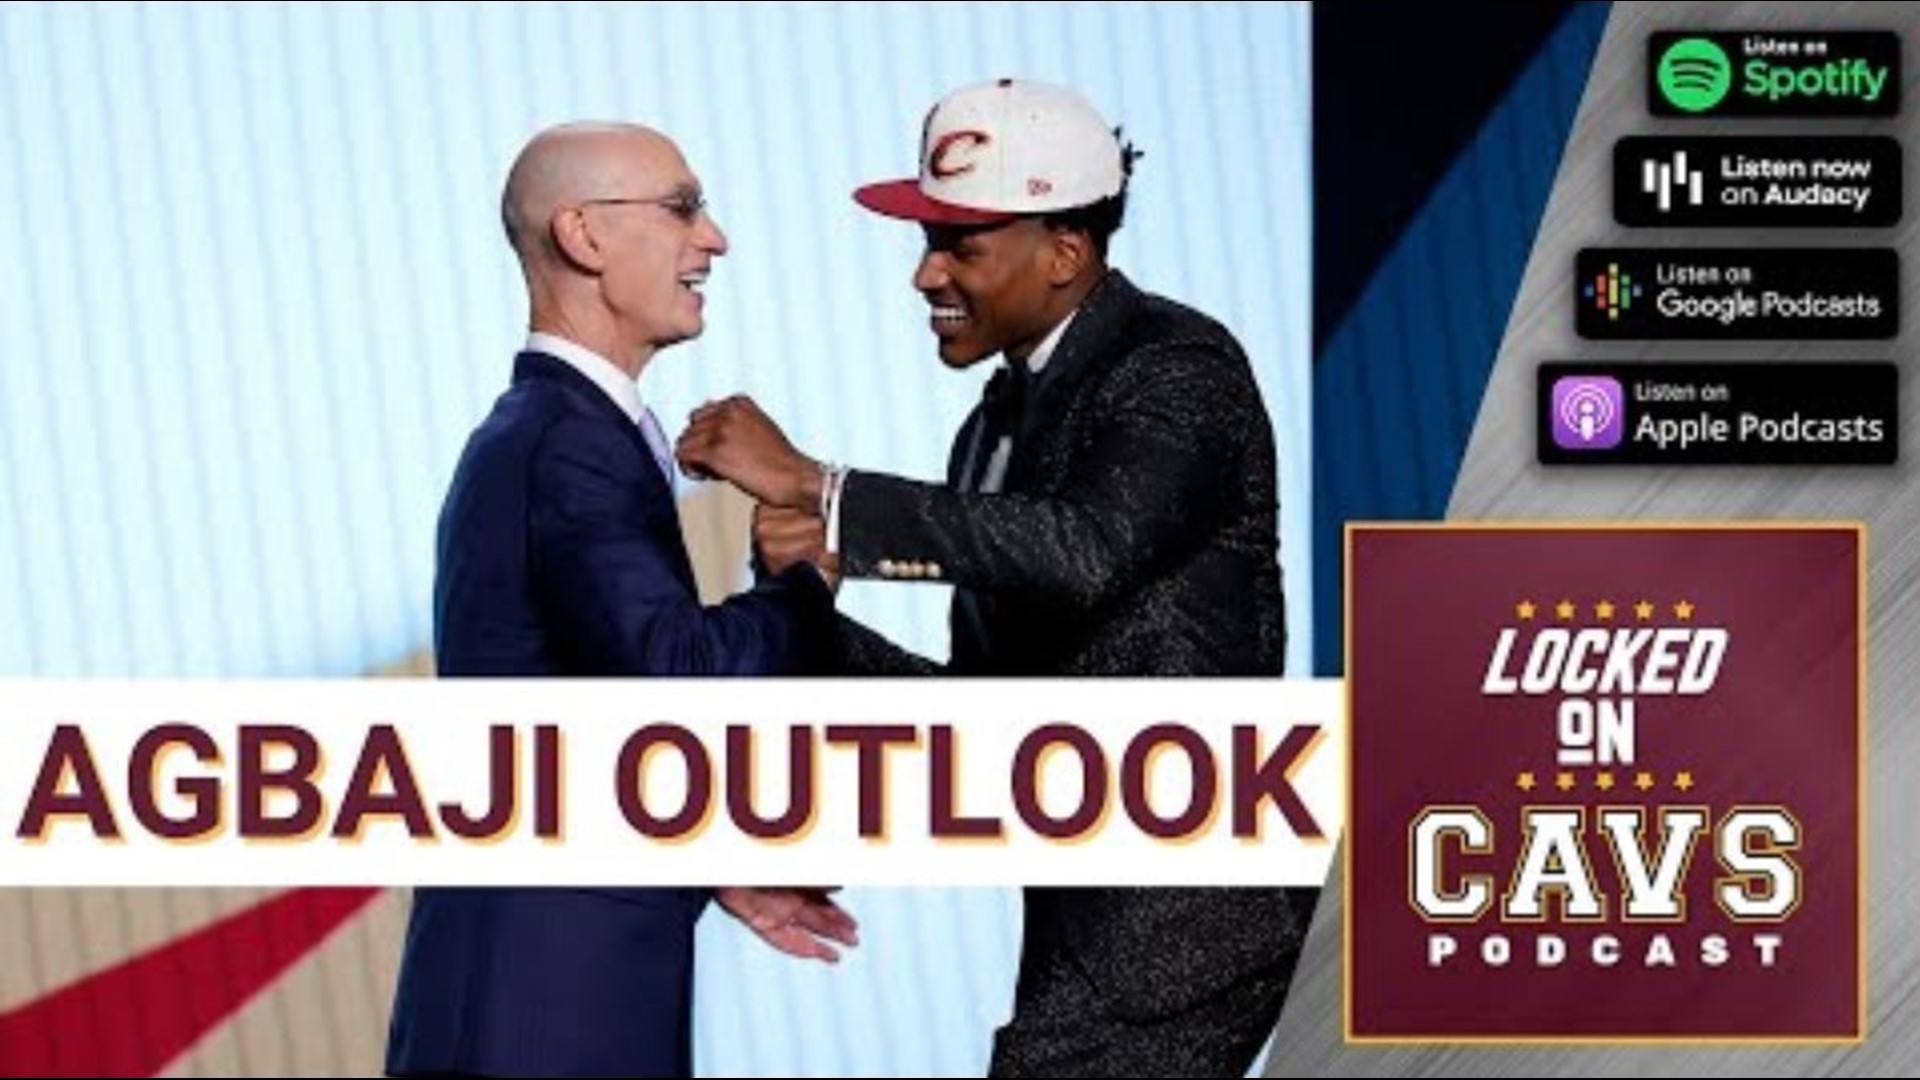 We discuss the Cavs picking Ochai Agbaji in the 2022 NBA Draft, how he might be used, what his rookie season outlook looks like and more.